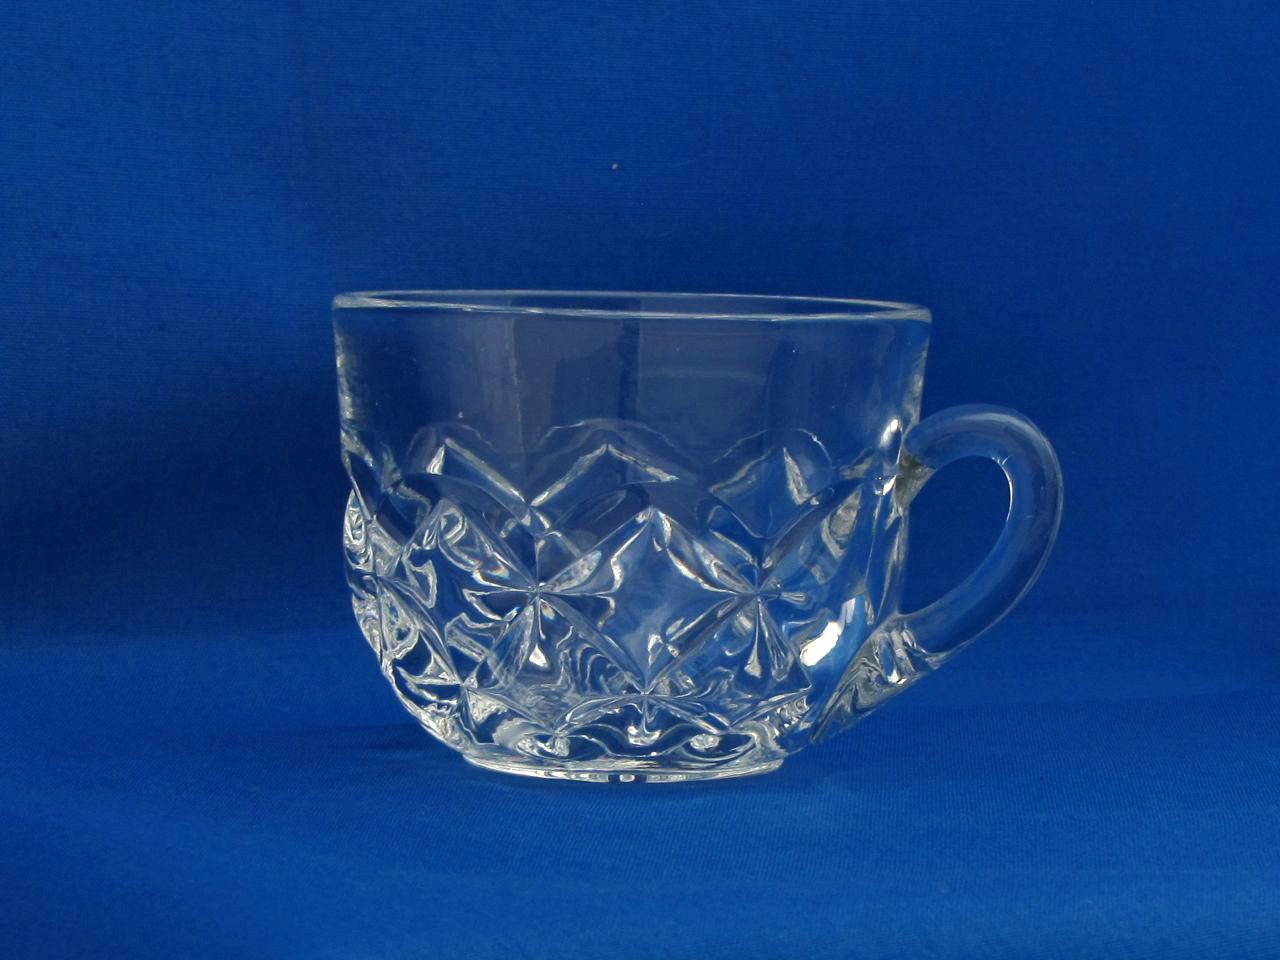 Heisey #325 Pillows Punch Cup, crystal, 1901-1910